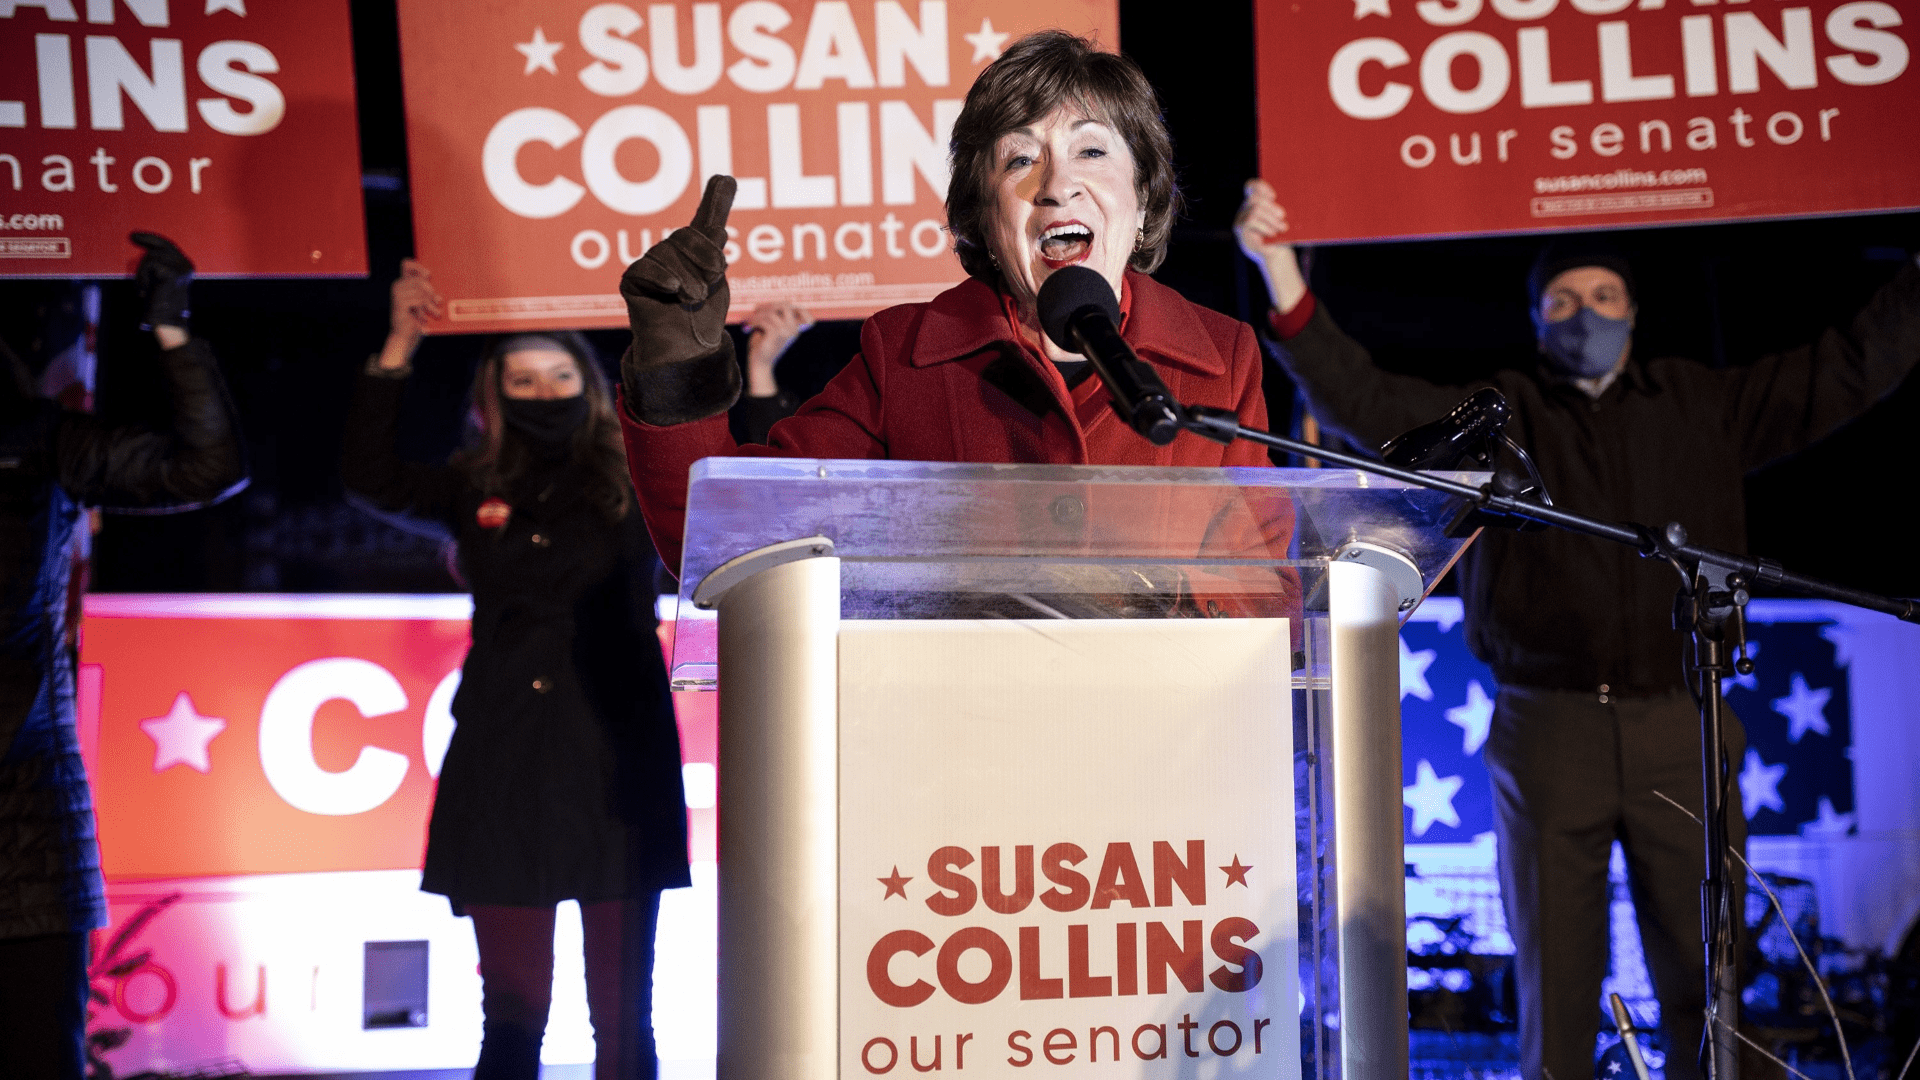 Susan Collins speaks into a microphone while standing at a podium during a campaign event